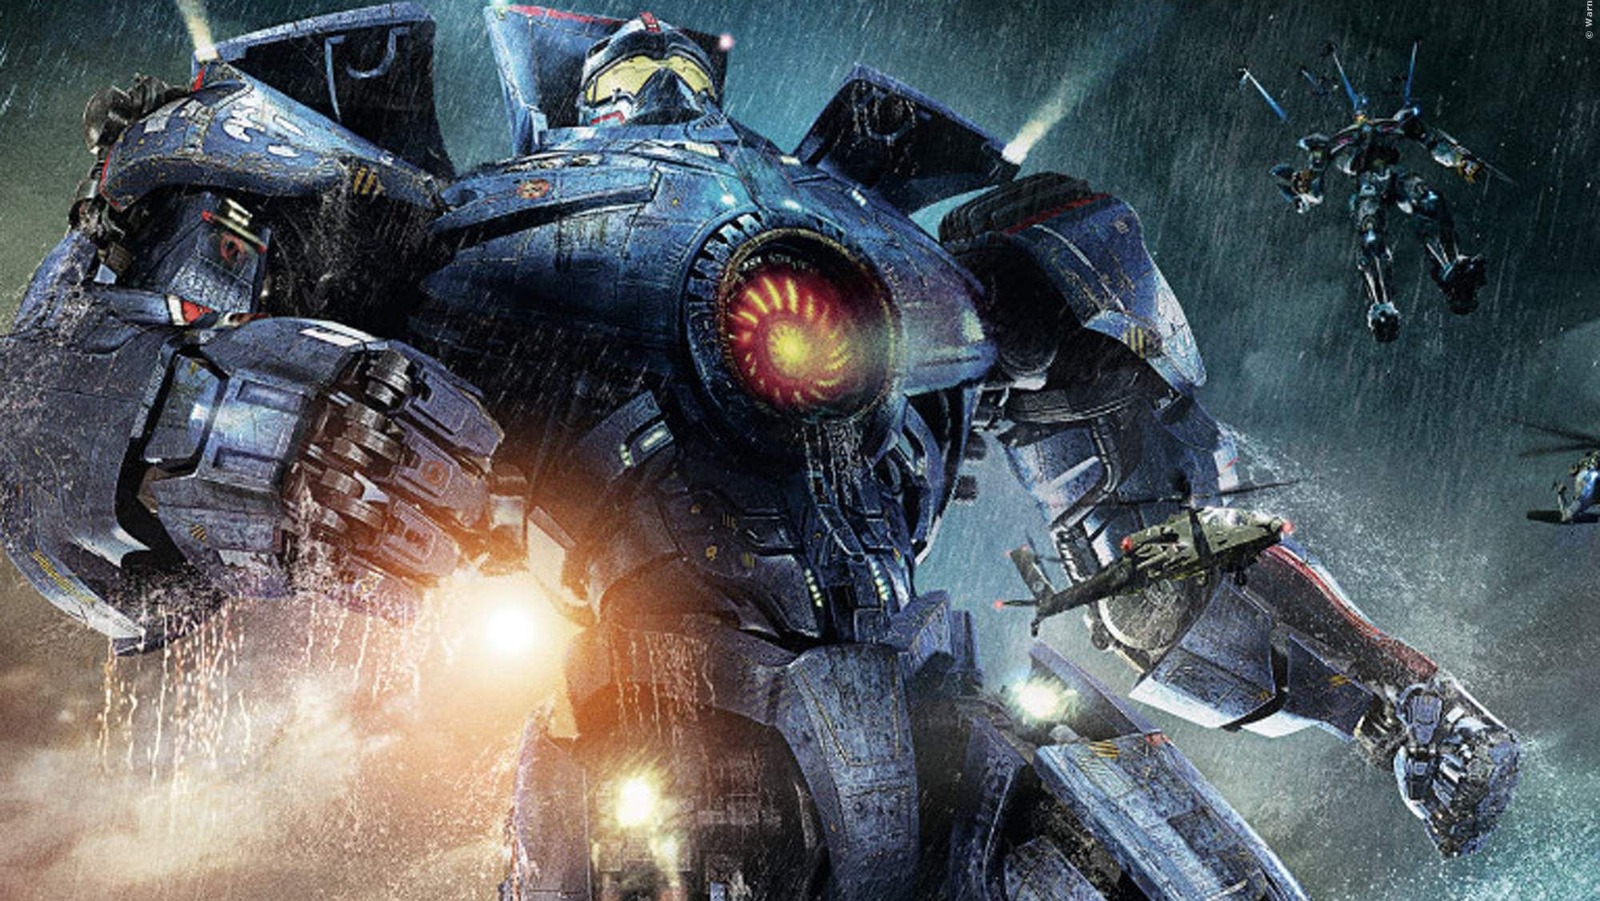 The Hong Kong Battle In Pacific Rim Is The Best Action Scene Ever